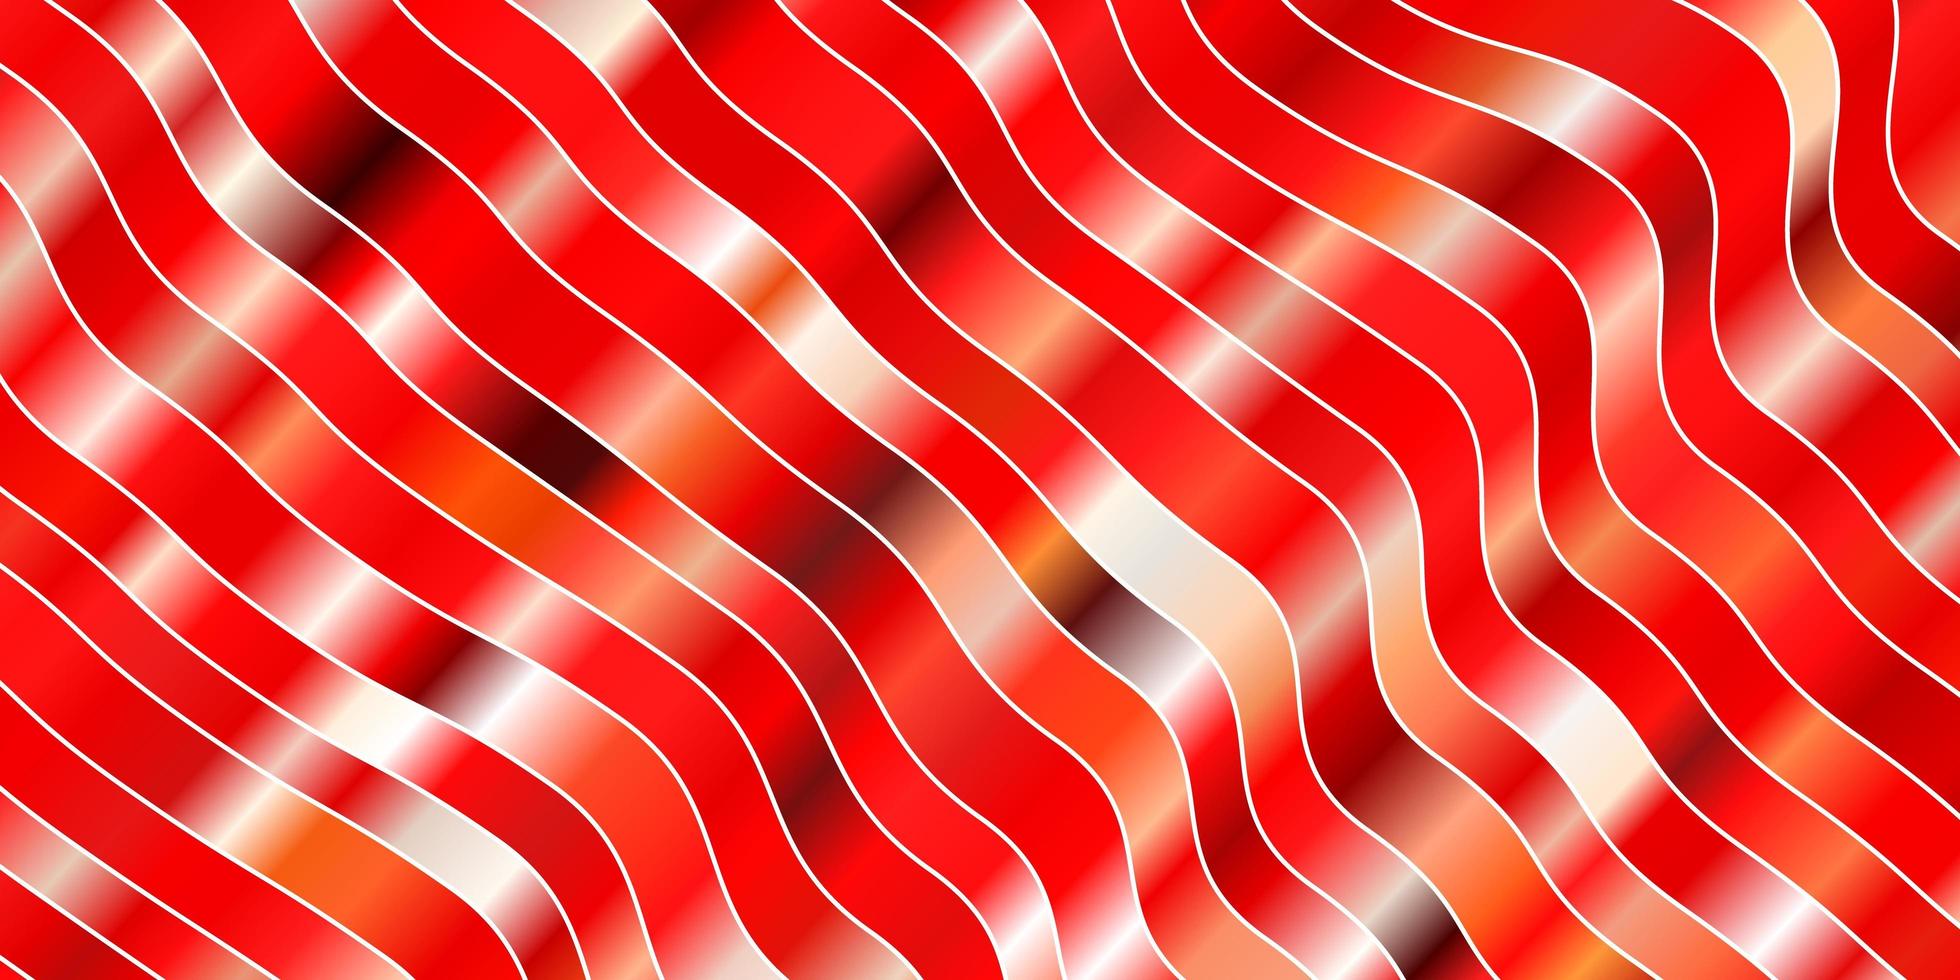 Light Red vector pattern with lines